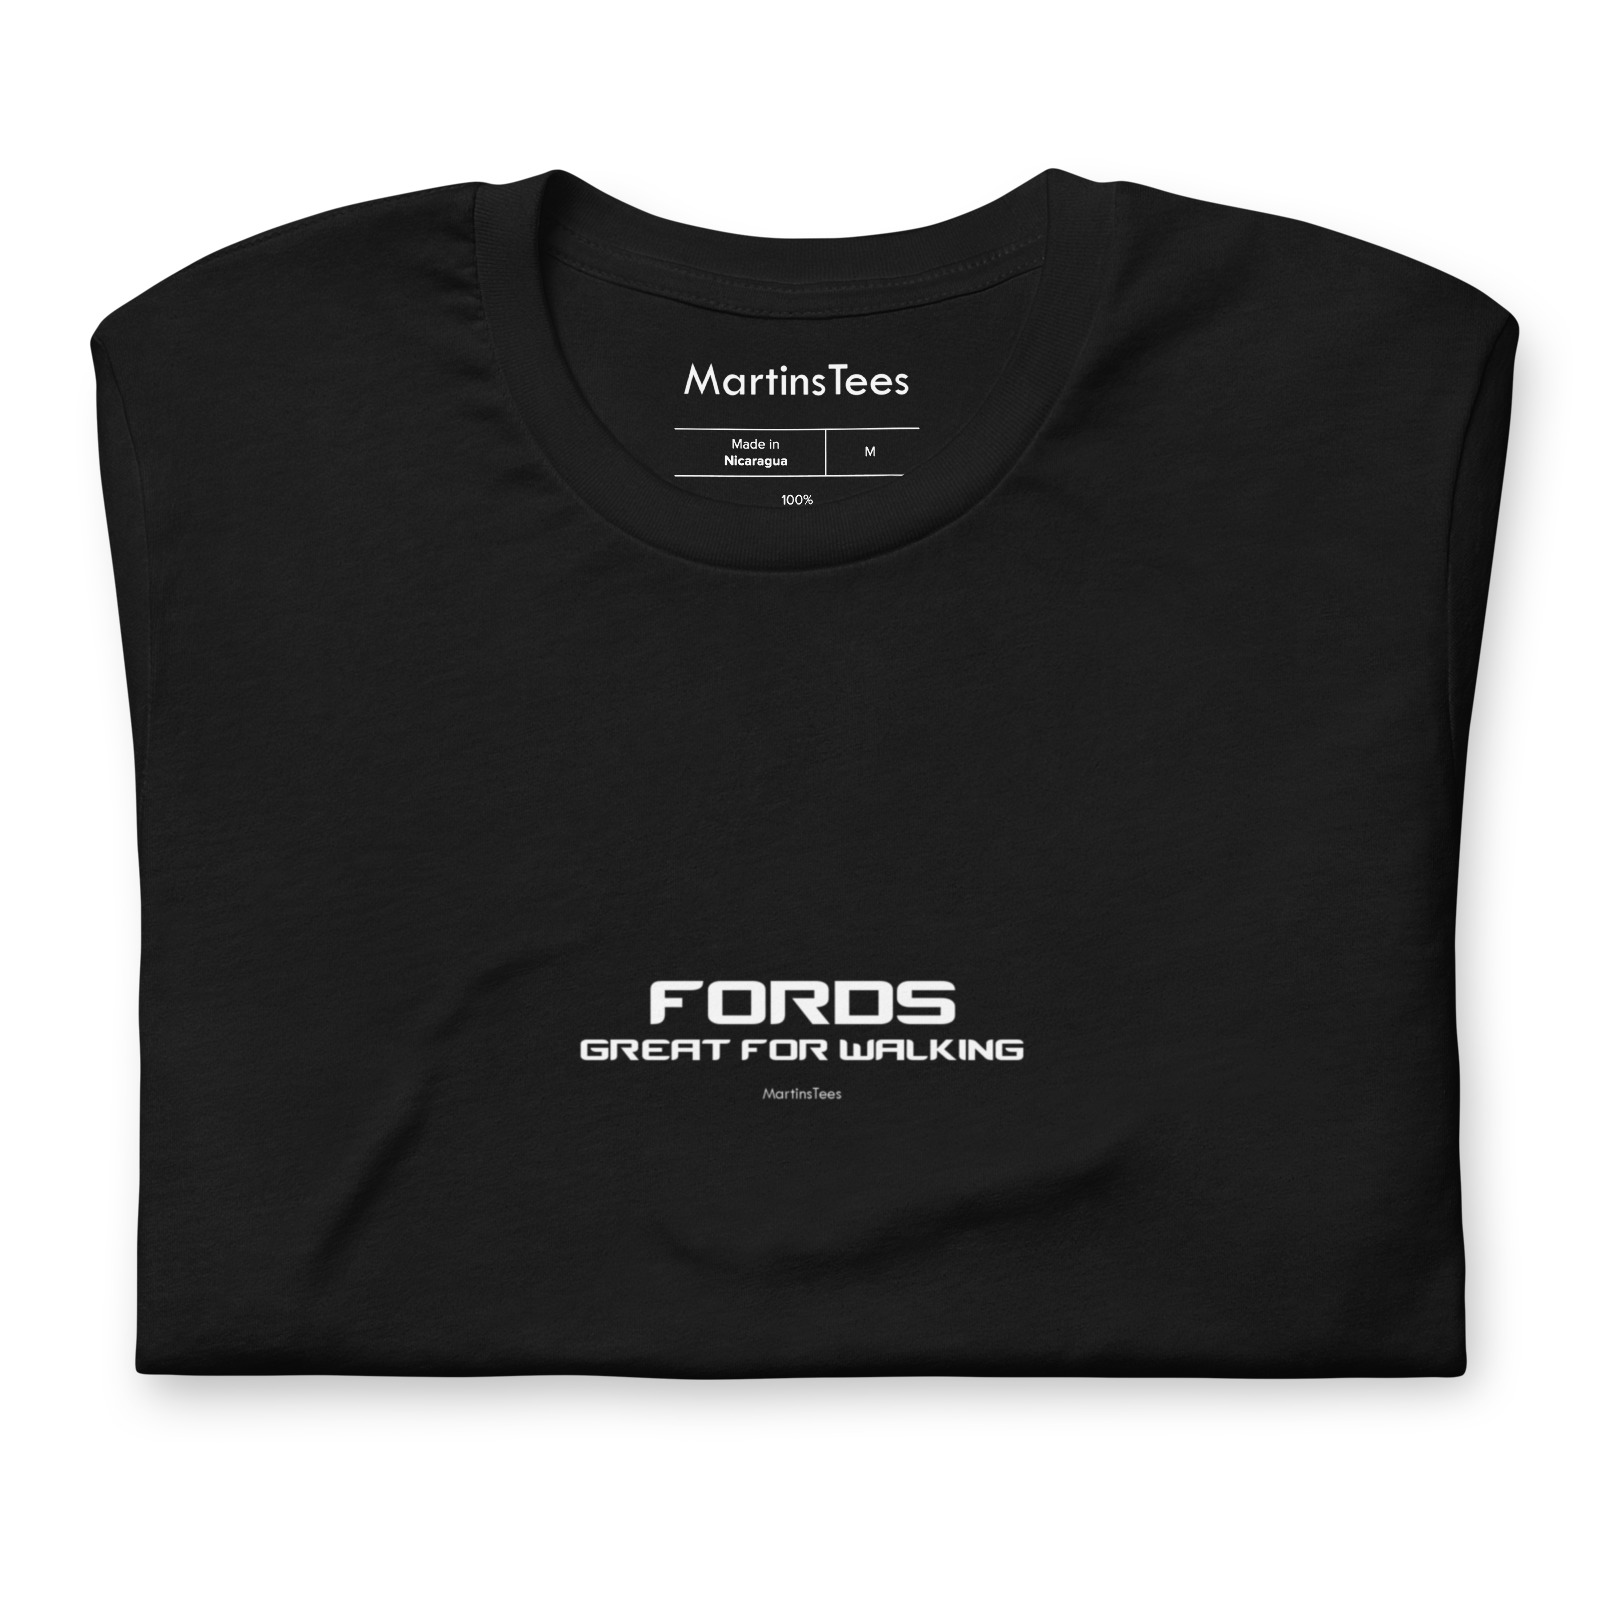 T-shirt: FORDS - GREAT FOR WALKING